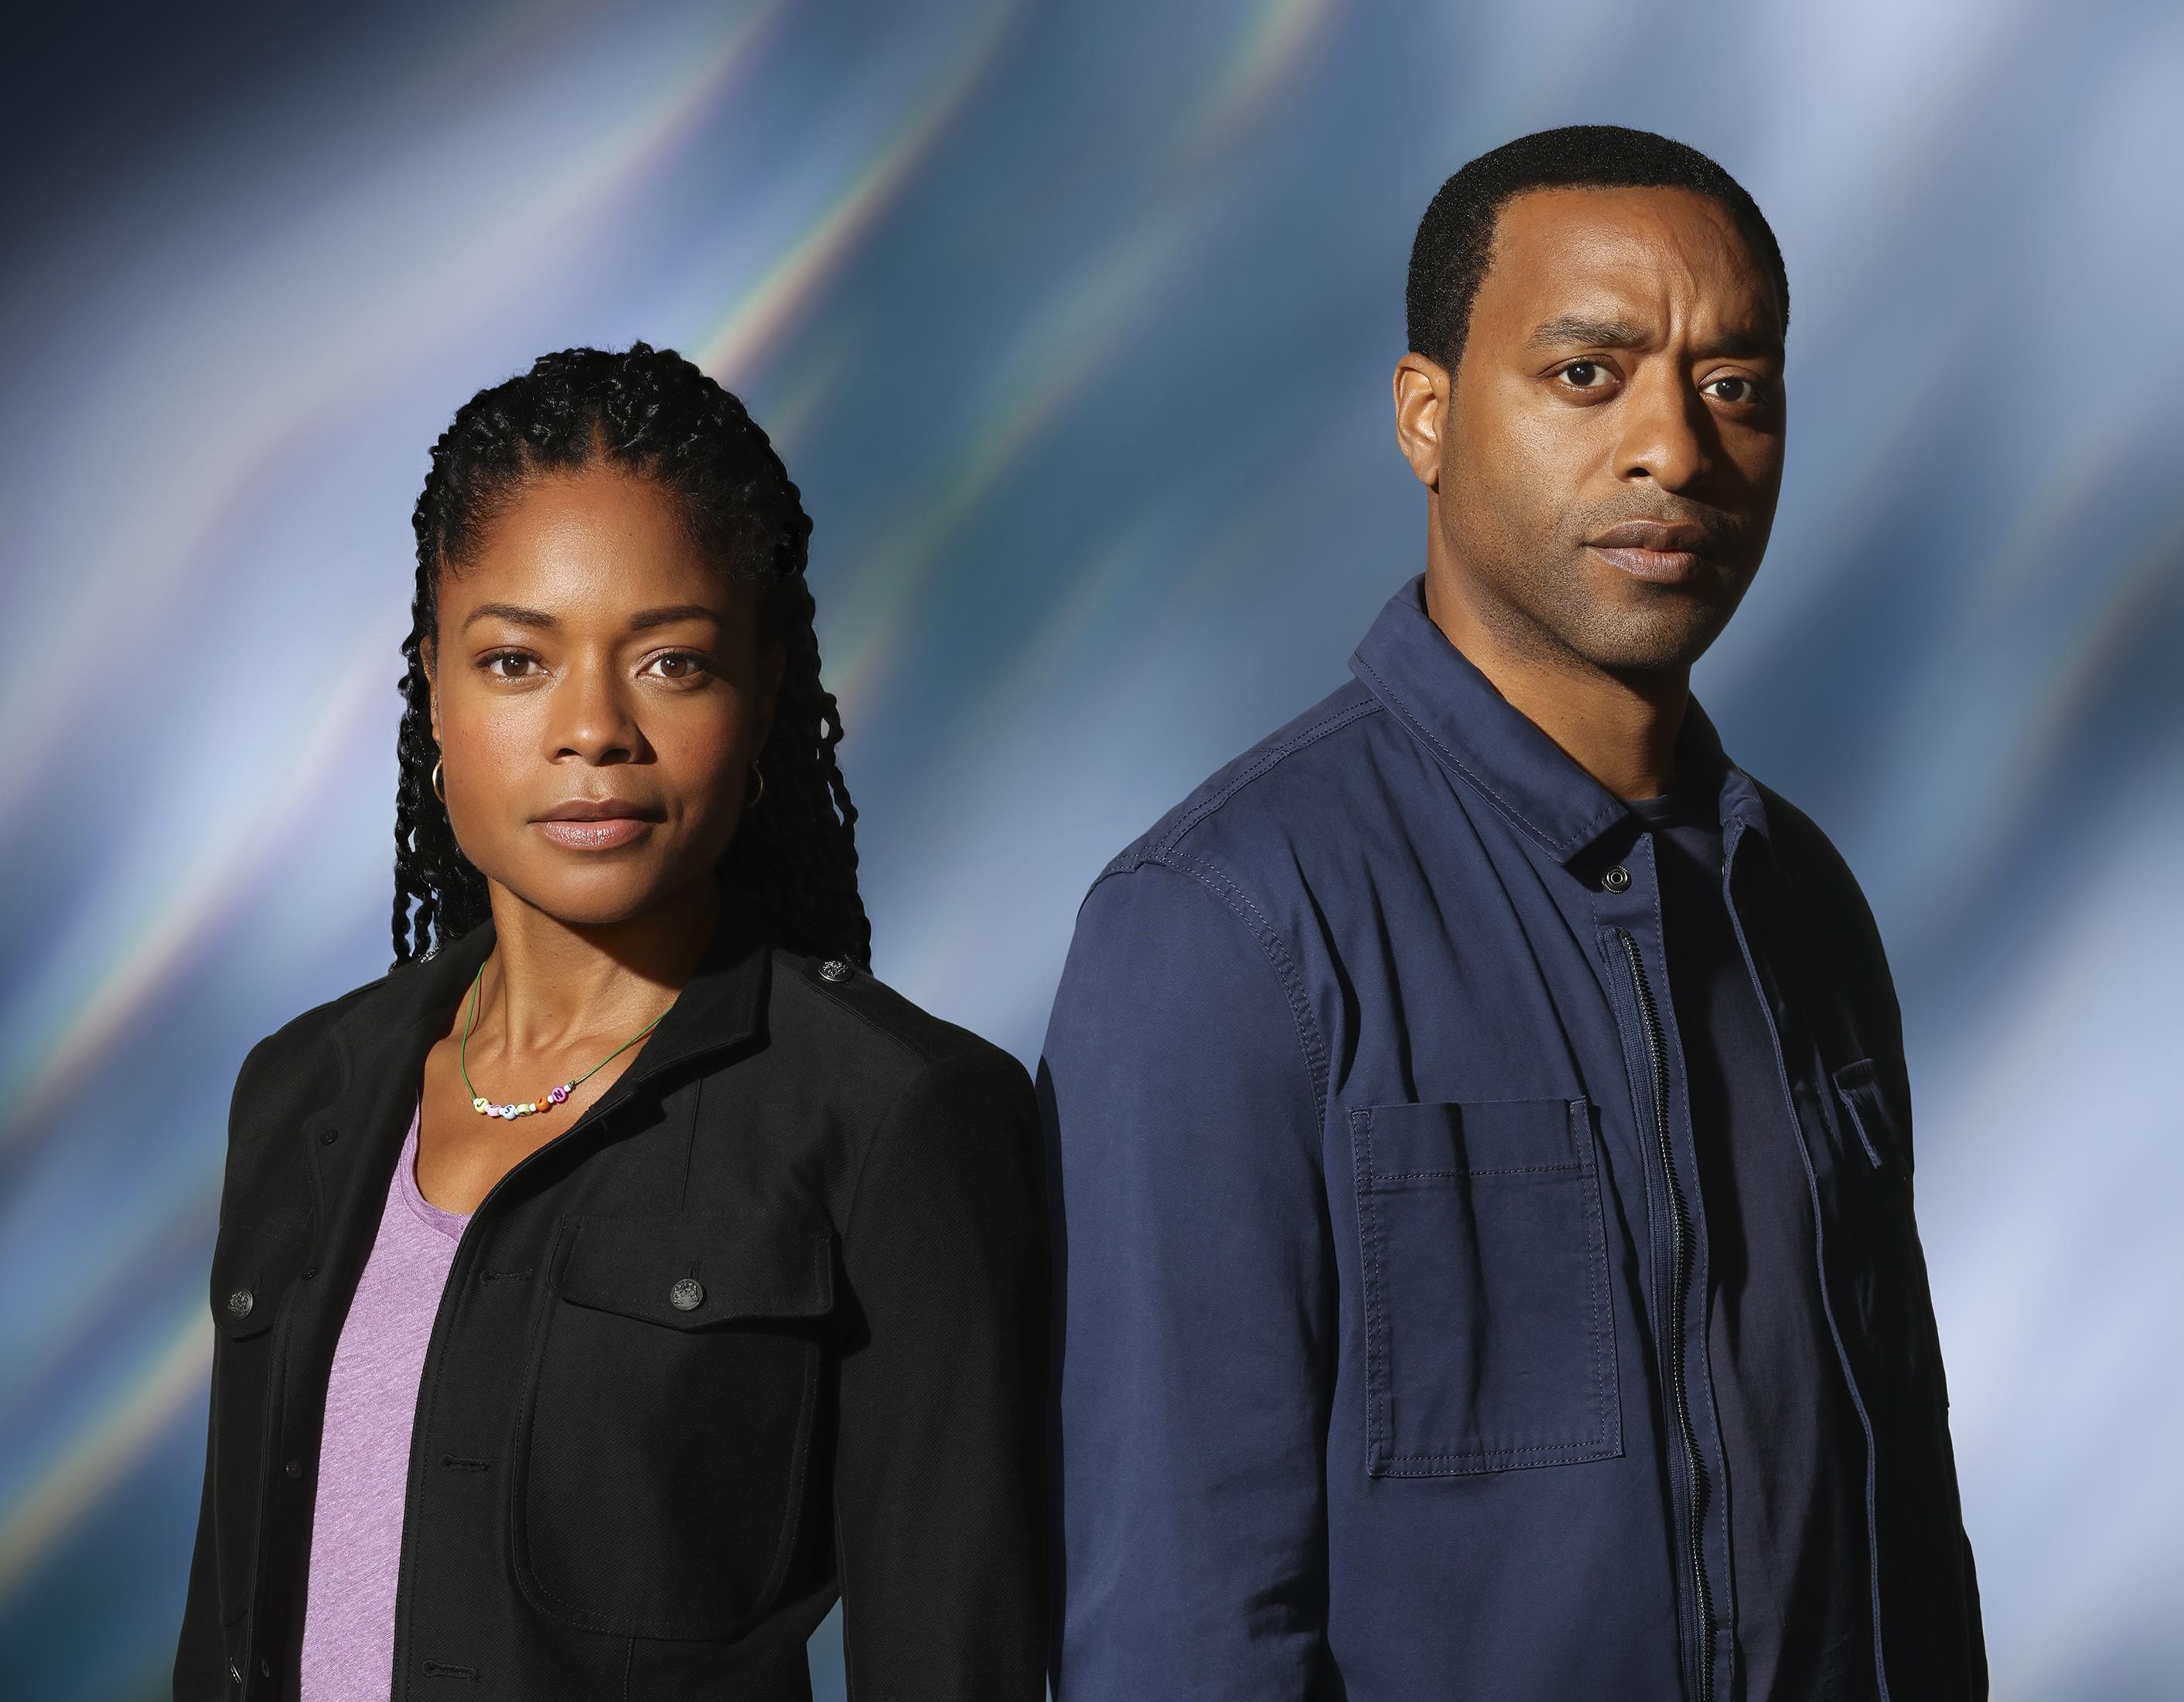 Actors Naomie Harris and Chiwetel Ejiofor stand in front a nebula backdrop dressed in their characters outfits